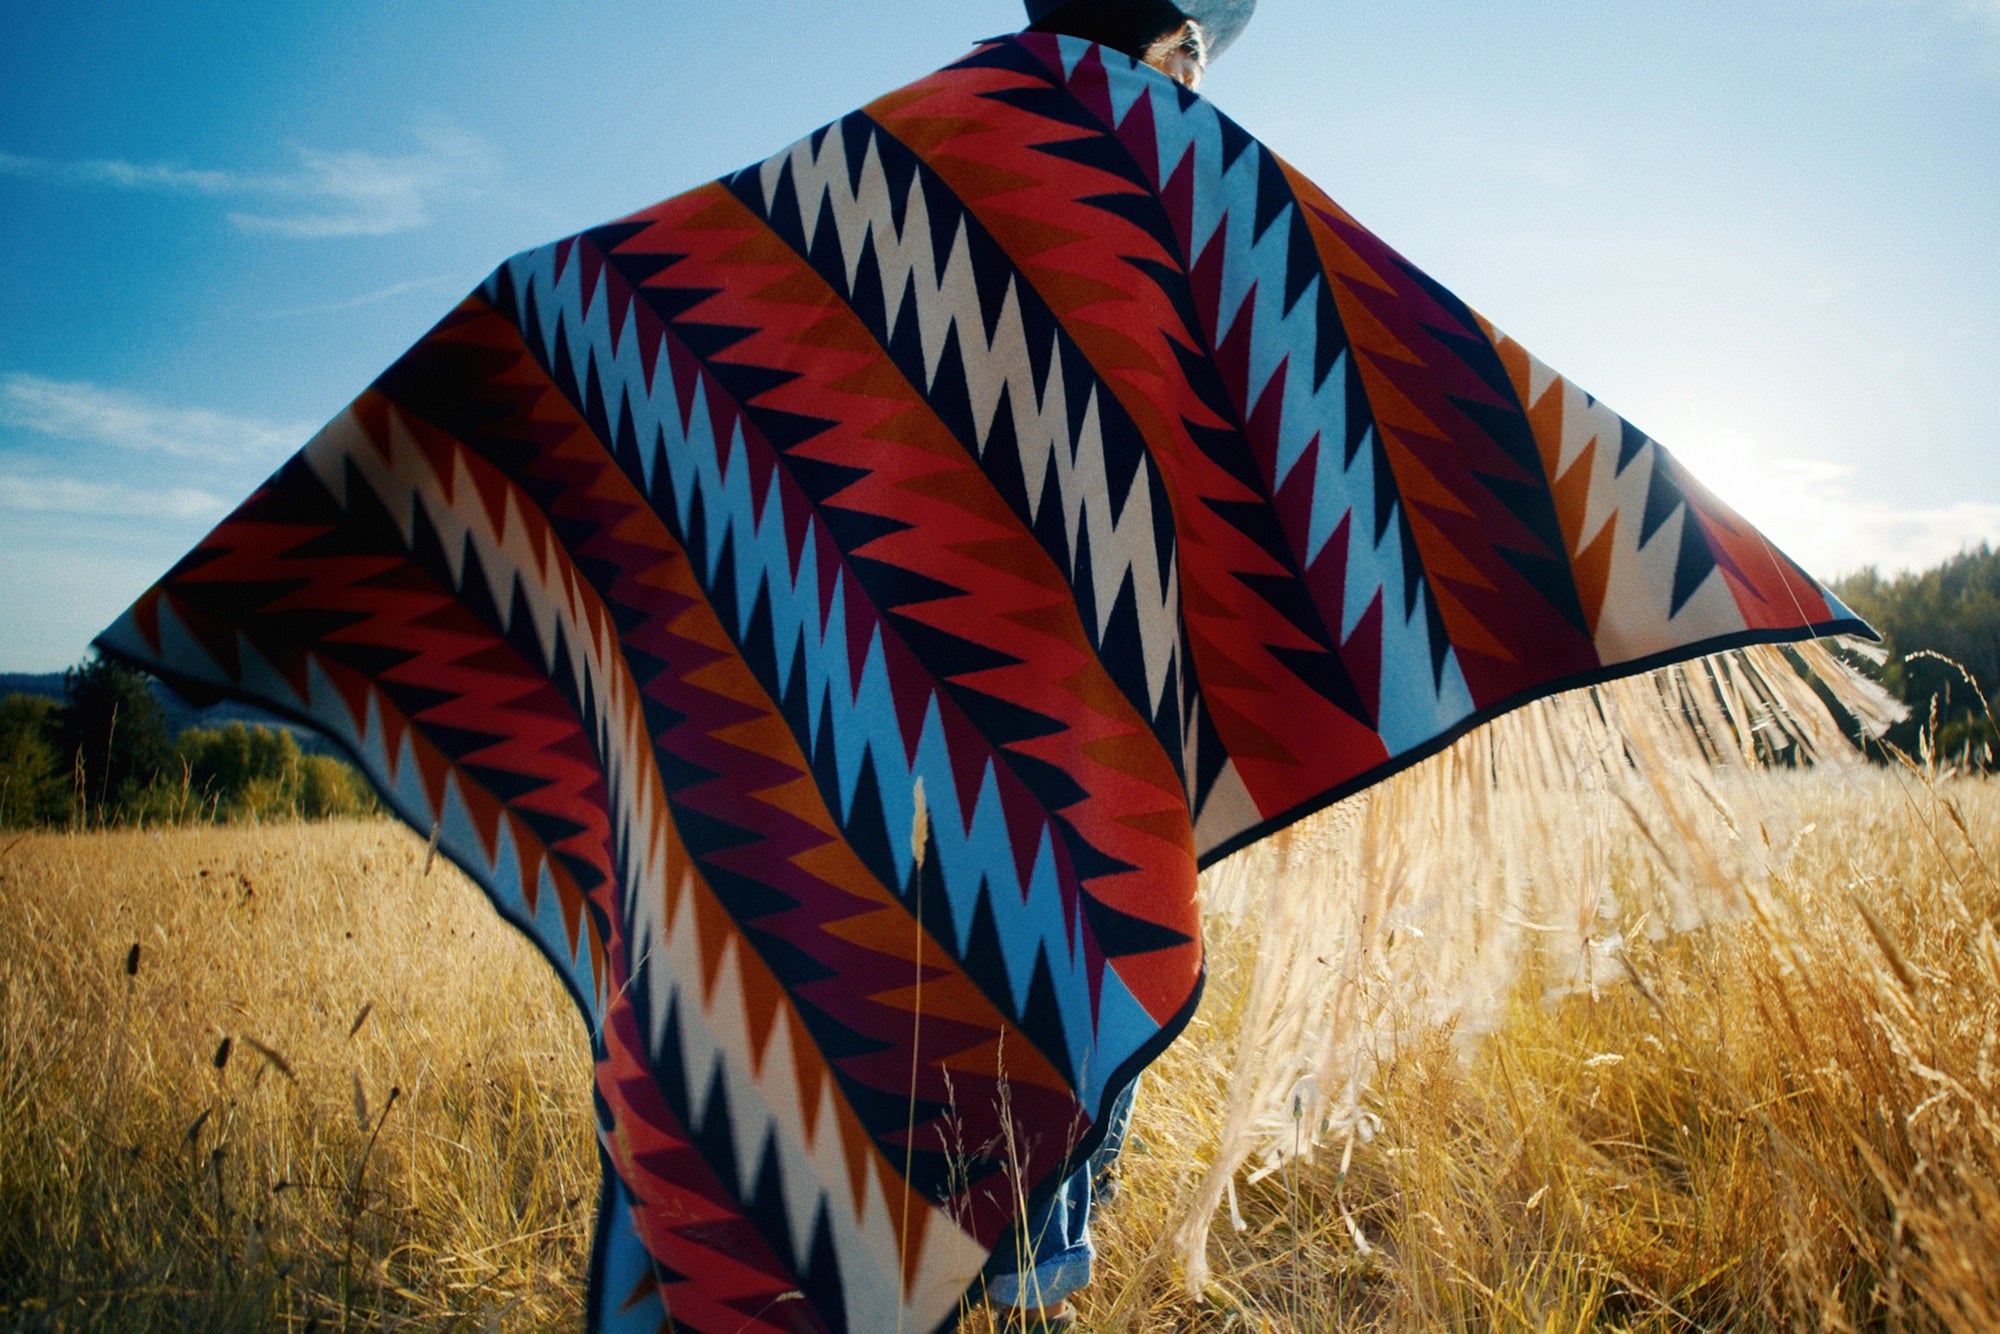 Red, black, tan wool blanket by Ginew and Native American model in field